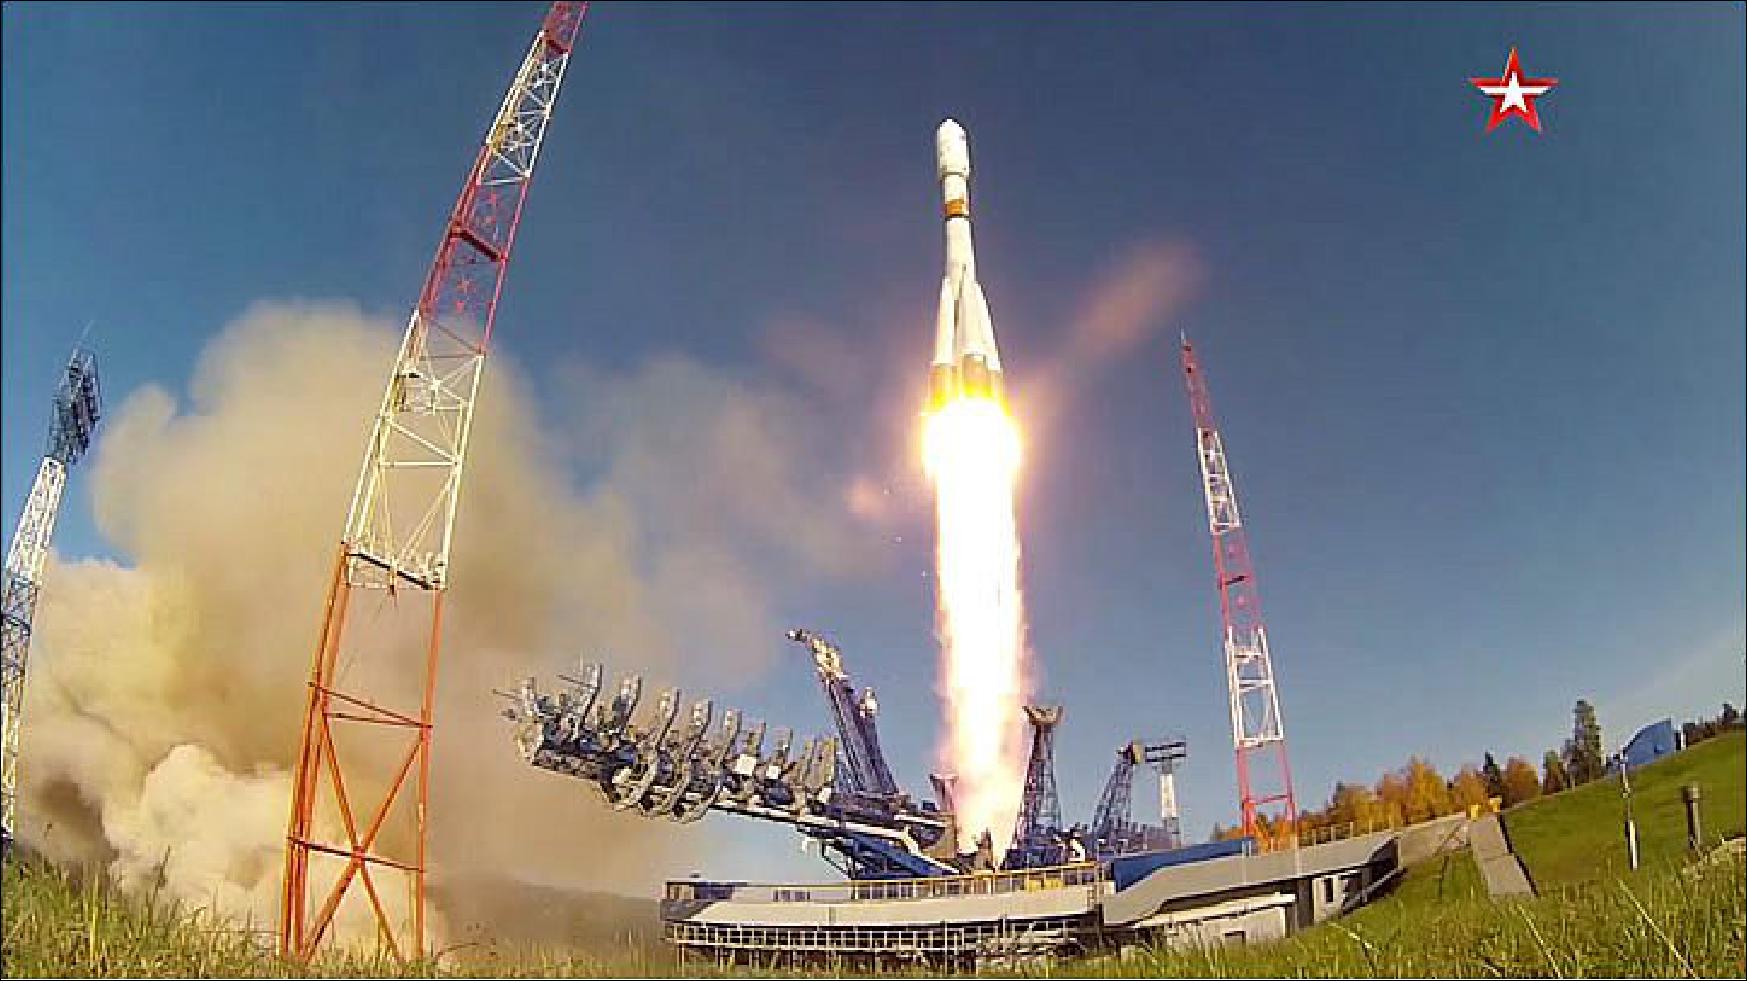 Figure 8: Launch photo of the 16th Gonets-M mission of primary payloads No 27, 28 and 29 plus 19 secondary payloads on a Soyuz-2-1b/Fregat vehicle from the Plesetsk Cosmodrome, Russia (image credit: Russian Spaceweb)